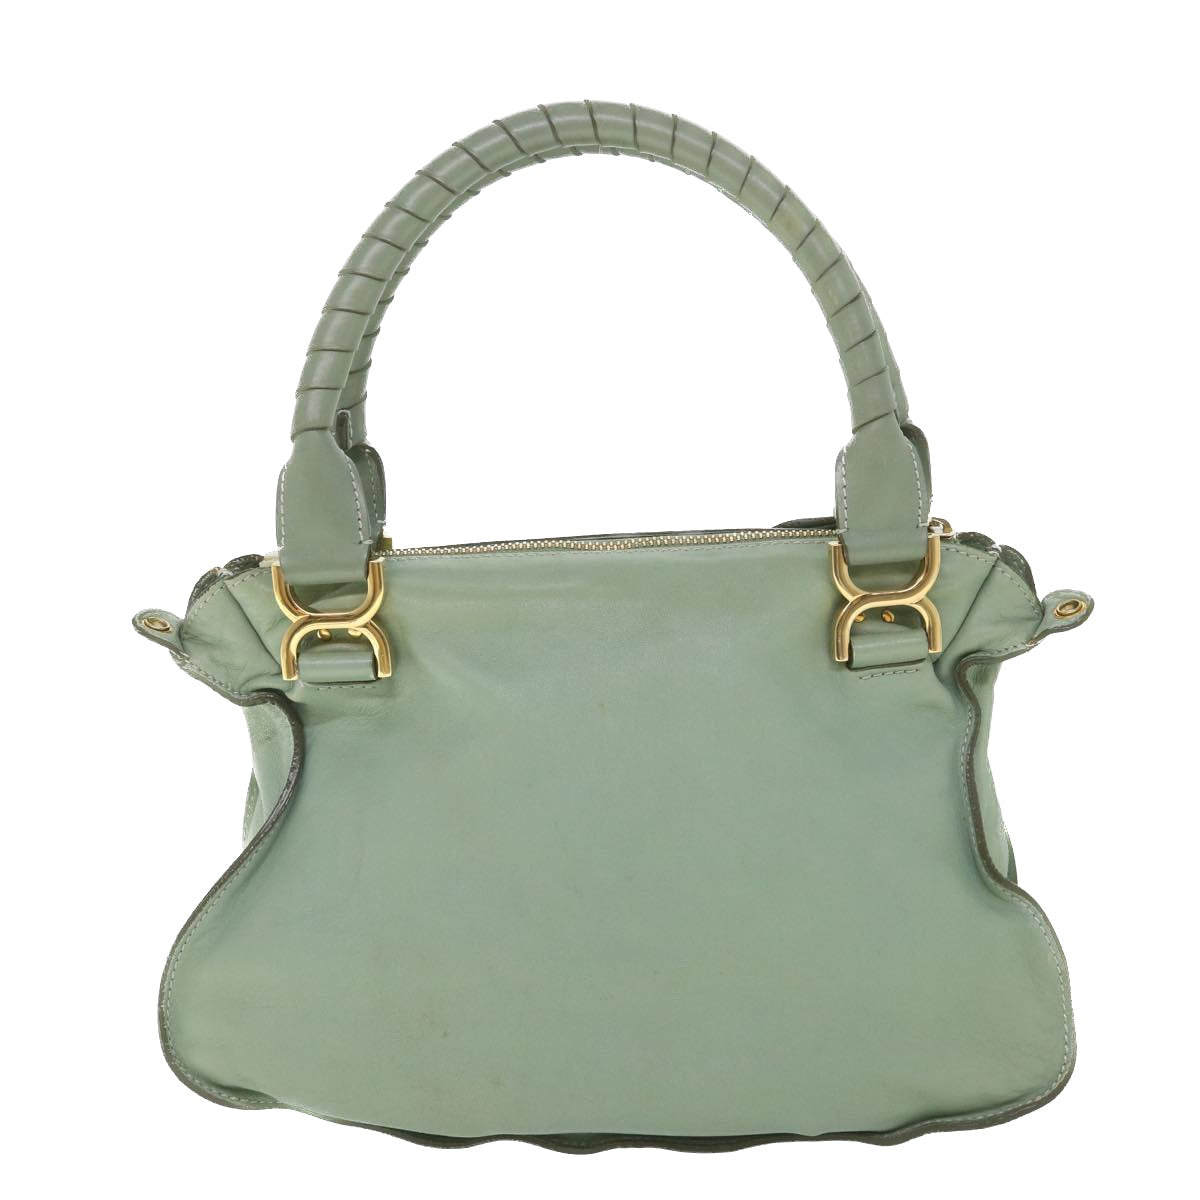 Chloe Mercy Shoulder Bag Leather 2way Green Auth 56669 - 0